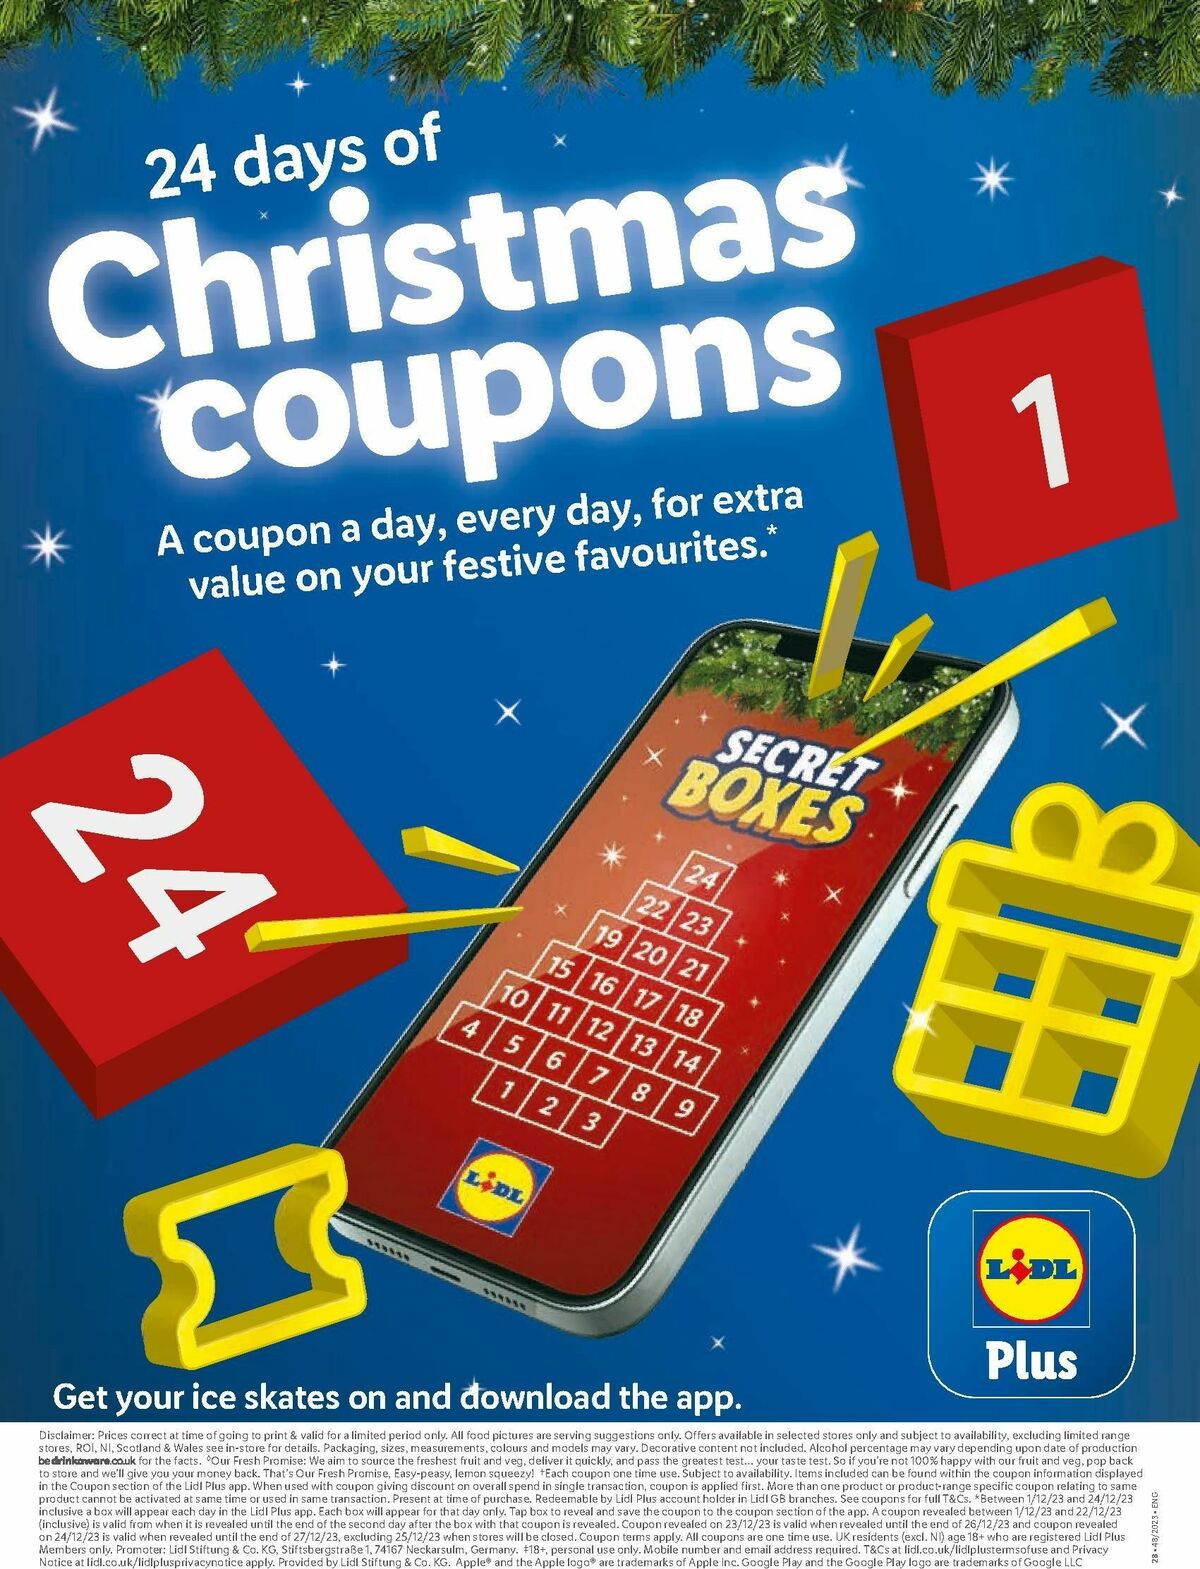 LIDL Offers from 30 November